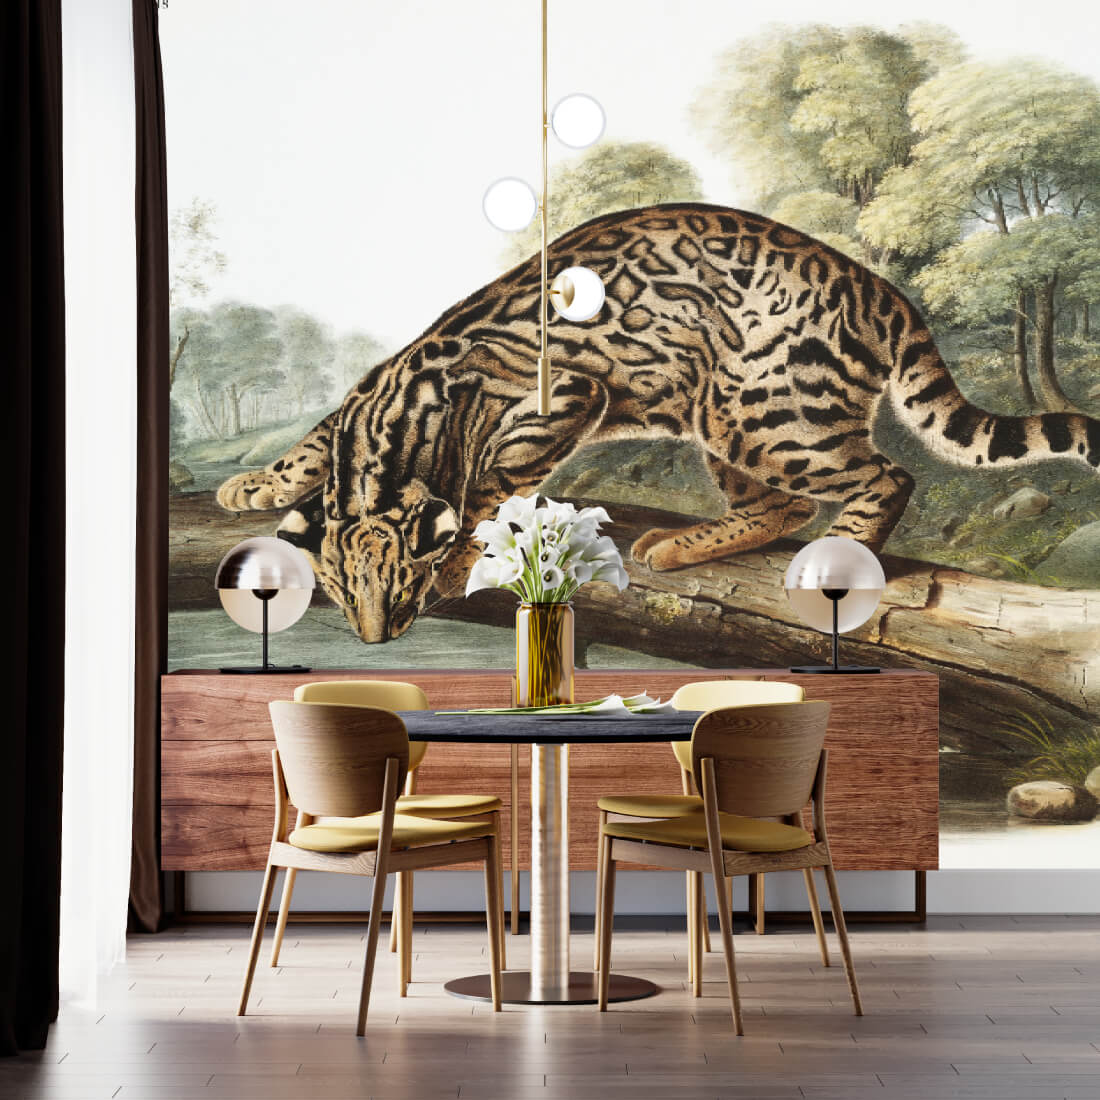 Leopard on the River Bank Mural Wallpaper (SqM)